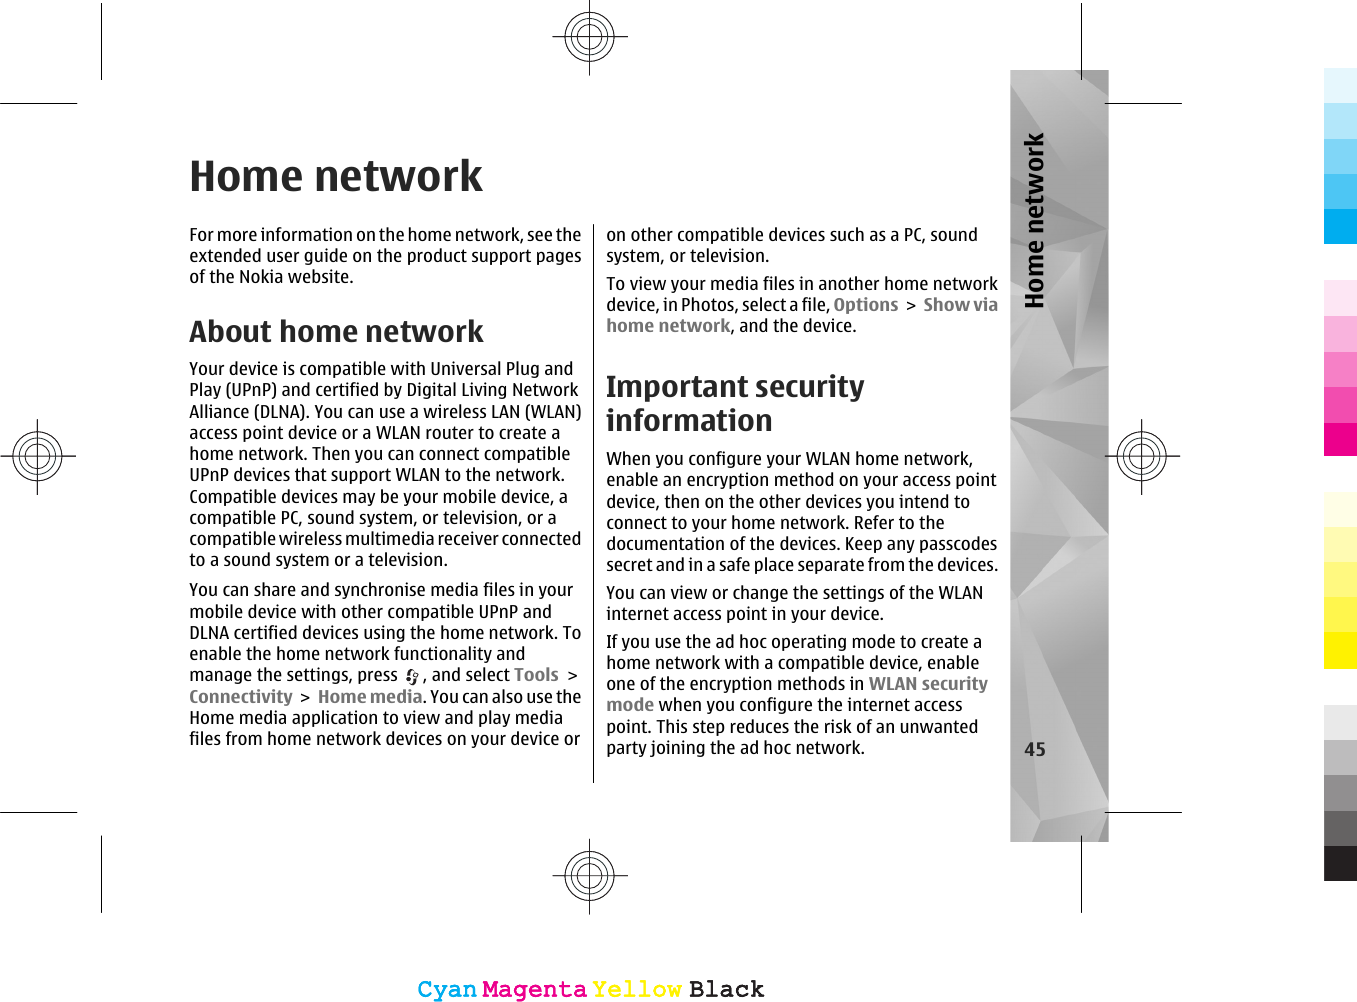 Home networkFor more information on the home network, see theextended user guide on the product support pagesof the Nokia website.About home networkYour device is compatible with Universal Plug andPlay (UPnP) and certified by Digital Living NetworkAlliance (DLNA). You can use a wireless LAN (WLAN)access point device or a WLAN router to create ahome network. Then you can connect compatibleUPnP devices that support WLAN to the network.Compatible devices may be your mobile device, acompatible PC, sound system, or television, or acompatible wireless multimedia receiver connectedto a sound system or a television.You can share and synchronise media files in yourmobile device with other compatible UPnP andDLNA certified devices using the home network. Toenable the home network functionality andmanage the settings, press  , and select Tools &gt;Connectivity &gt; Home media. You can also use theHome media application to view and play mediafiles from home network devices on your device oron other compatible devices such as a PC, soundsystem, or television.To view your media files in another home networkdevice, in Photos, select a file, Options &gt;  Show viahome network, and the device.Important securityinformationWhen you configure your WLAN home network,enable an encryption method on your access pointdevice, then on the other devices you intend toconnect to your home network. Refer to thedocumentation of the devices. Keep any passcodessecret and in a safe place separate from the devices.You can view or change the settings of the WLANinternet access point in your device.If you use the ad hoc operating mode to create ahome network with a compatible device, enableone of the encryption methods in WLAN securitymode when you configure the internet accesspoint. This step reduces the risk of an unwantedparty joining the ad hoc network. 45Home networkCyanCyanMagentaMagentaYellowYellowBlackBlackCyanCyanMagentaMagentaYellowYellowBlackBlack